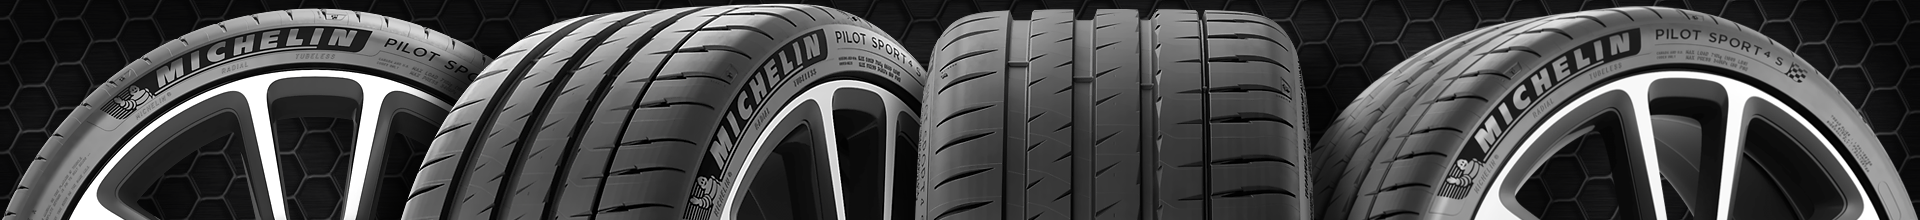 305 65 18 discount tires from Tire Outlet US